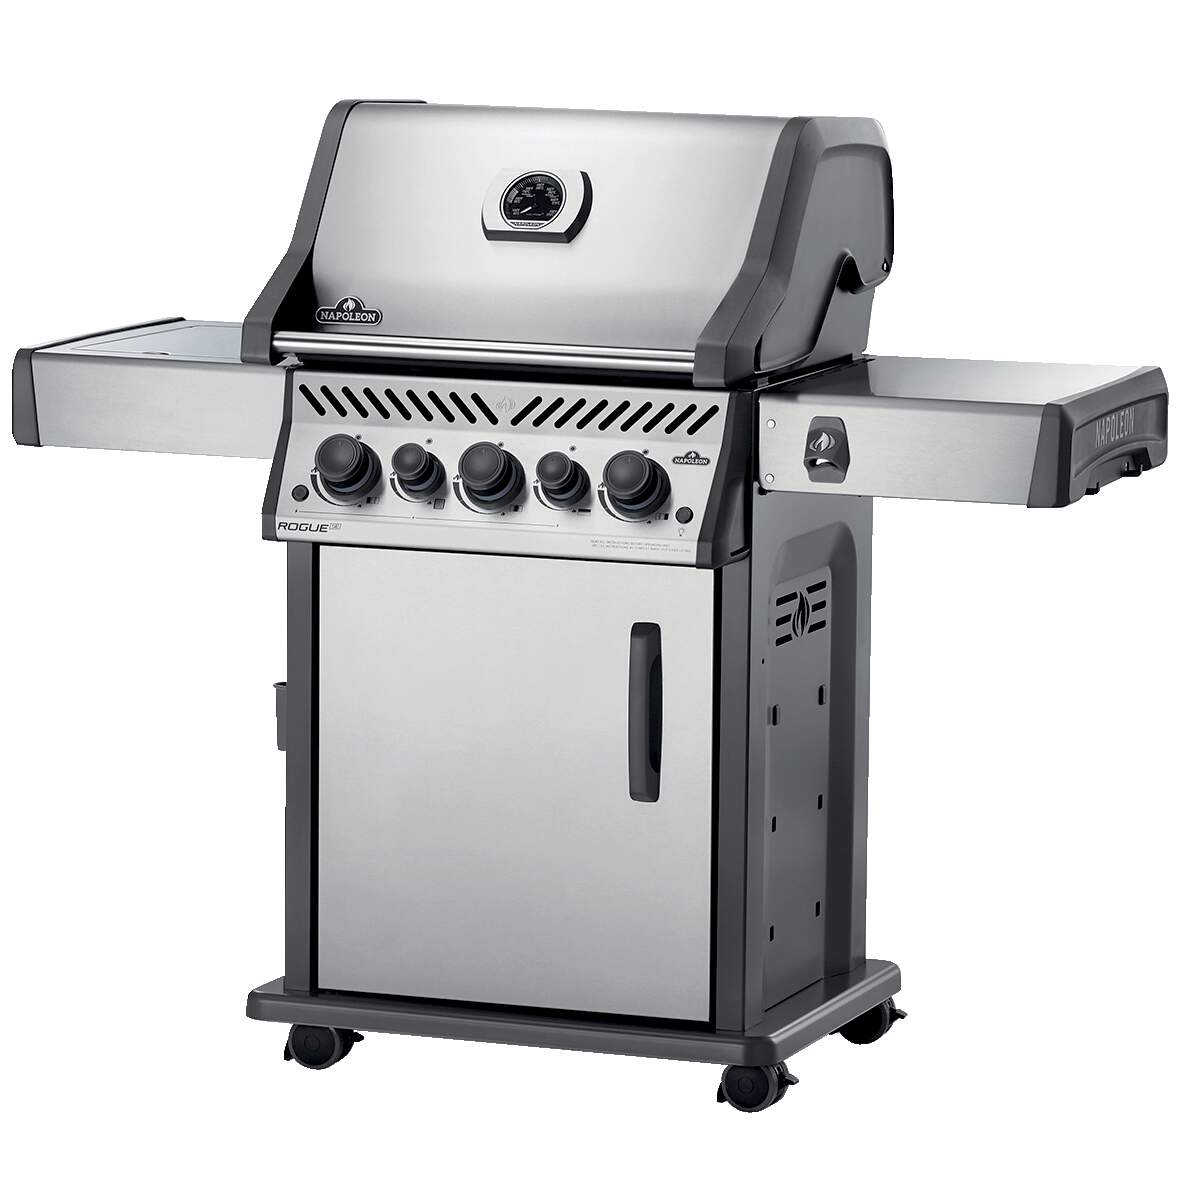 1259295 - Gasgrill Rogue SE425 ES m. Sizzle Zone & Heckbrenner